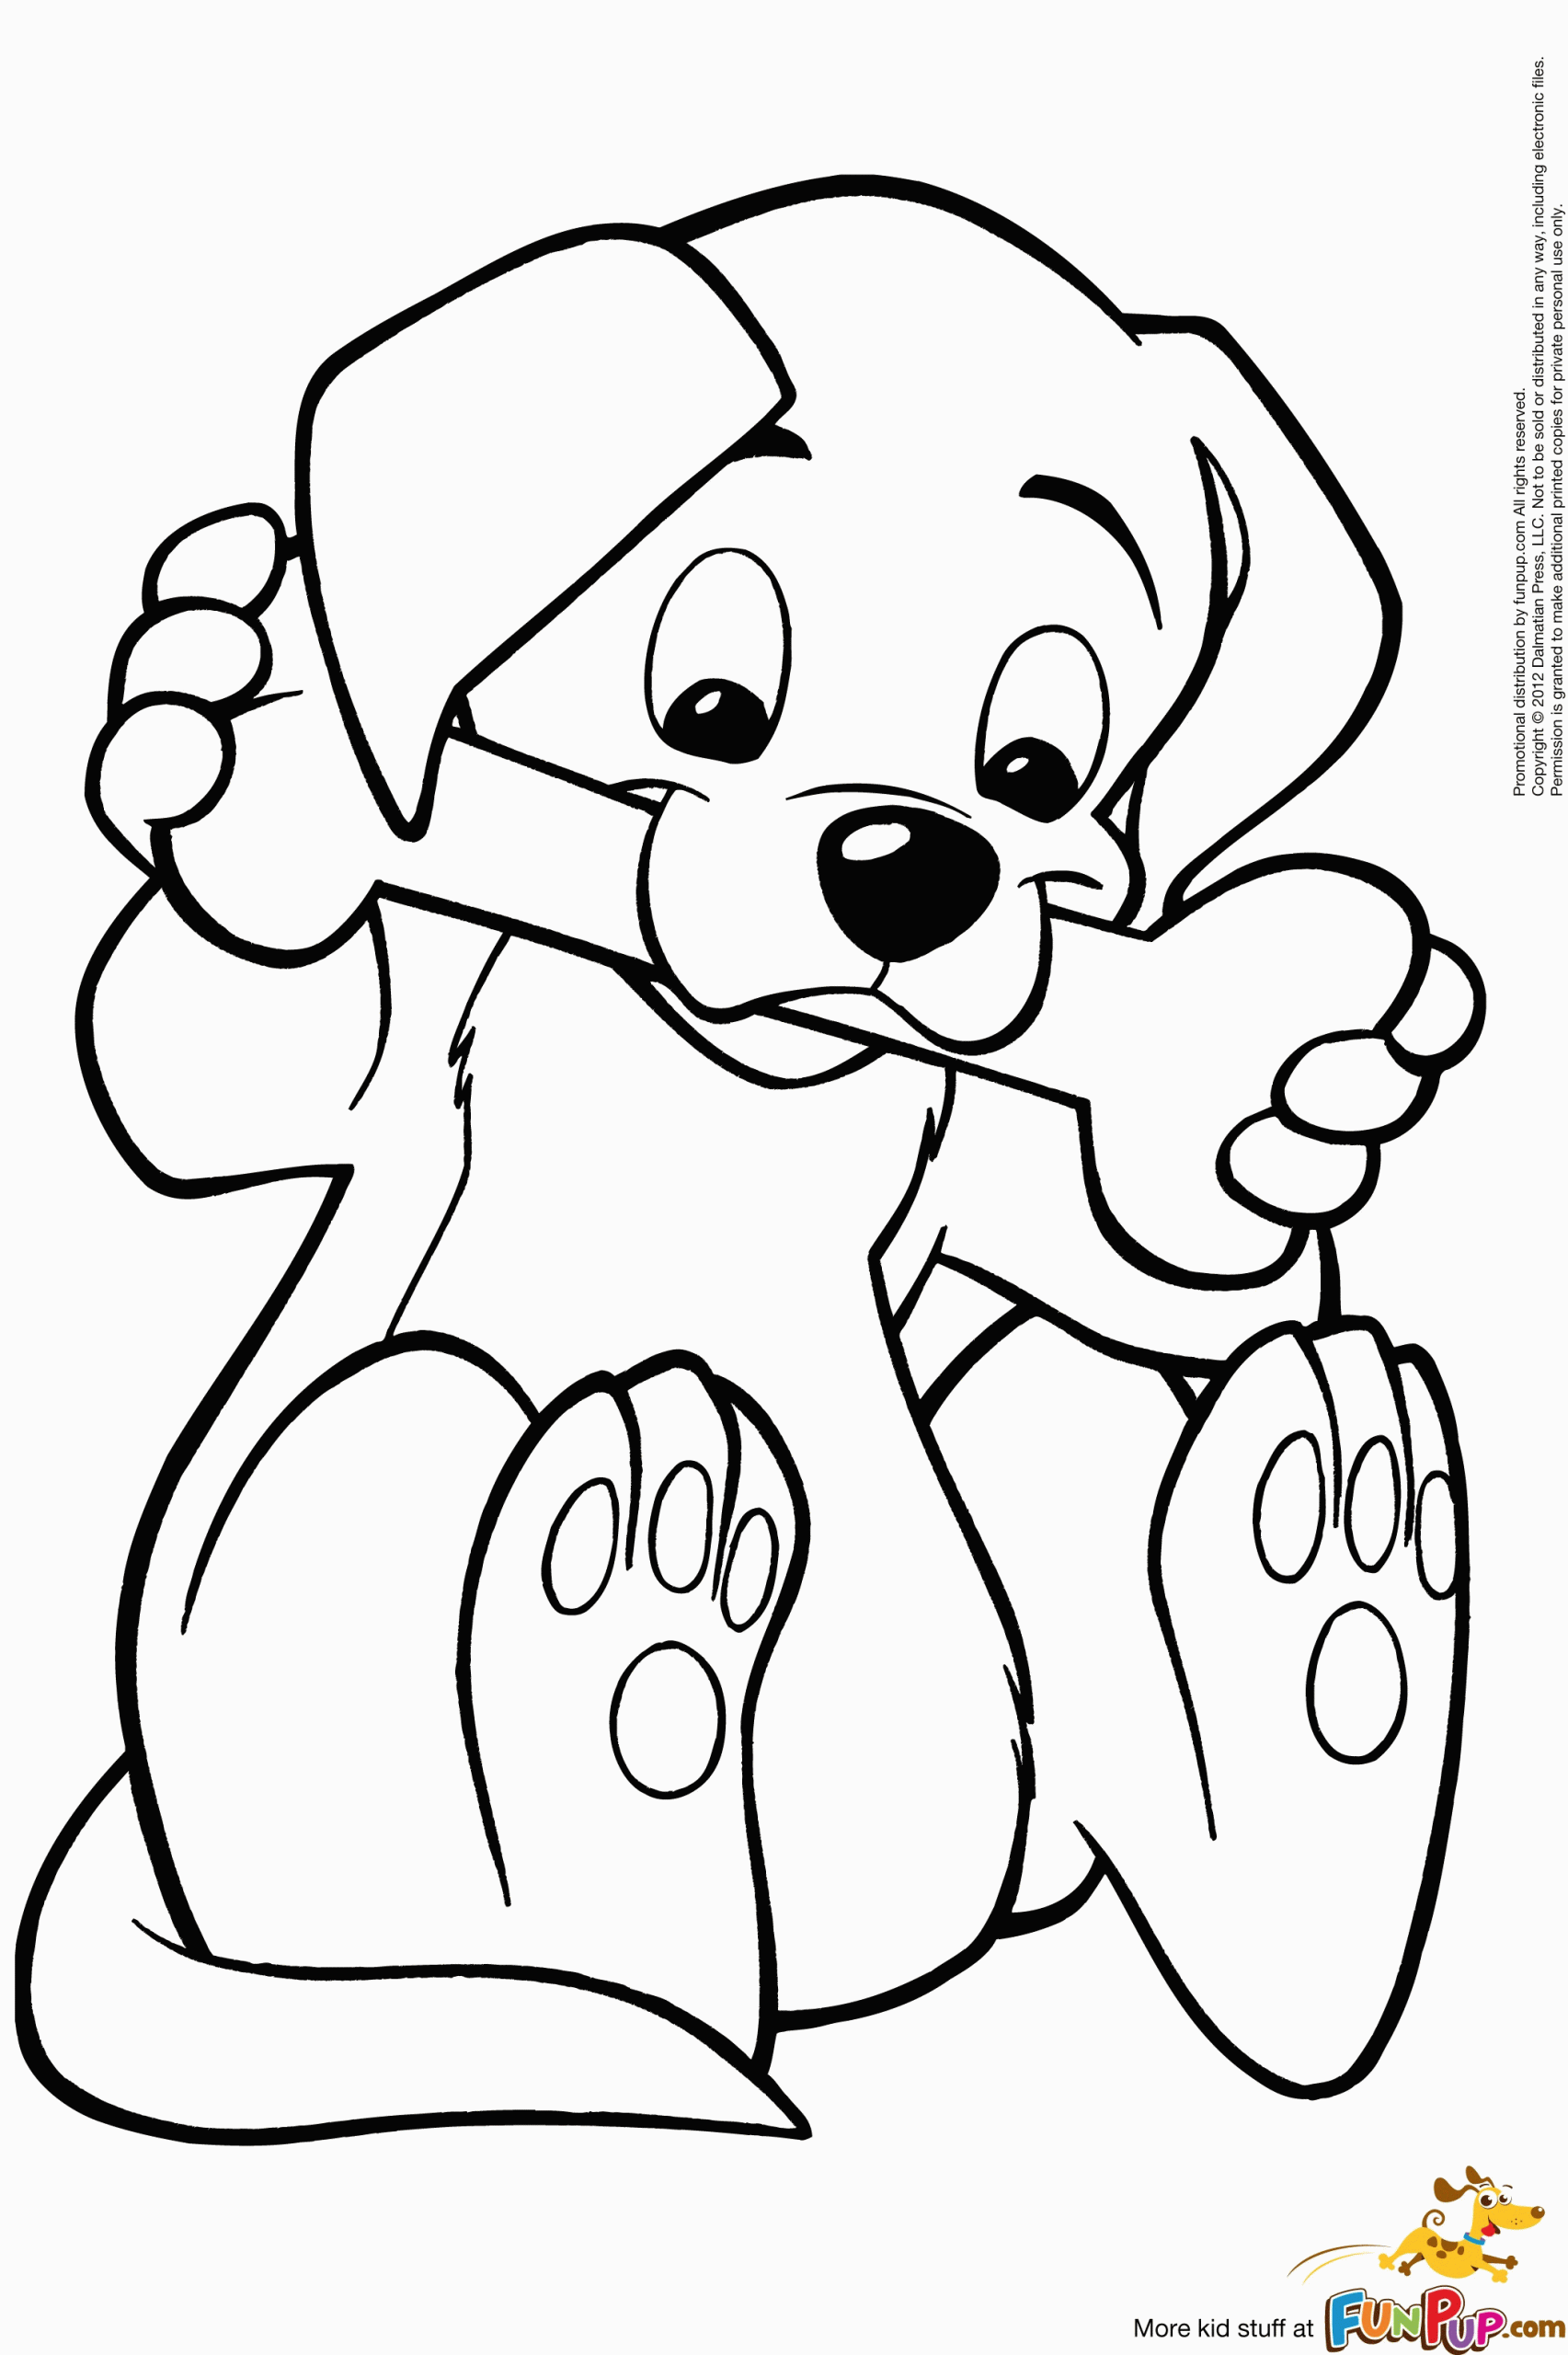 Free Printable Puppy Coloring Pages
 Printable Coloring Pages Puppies Coloring Home